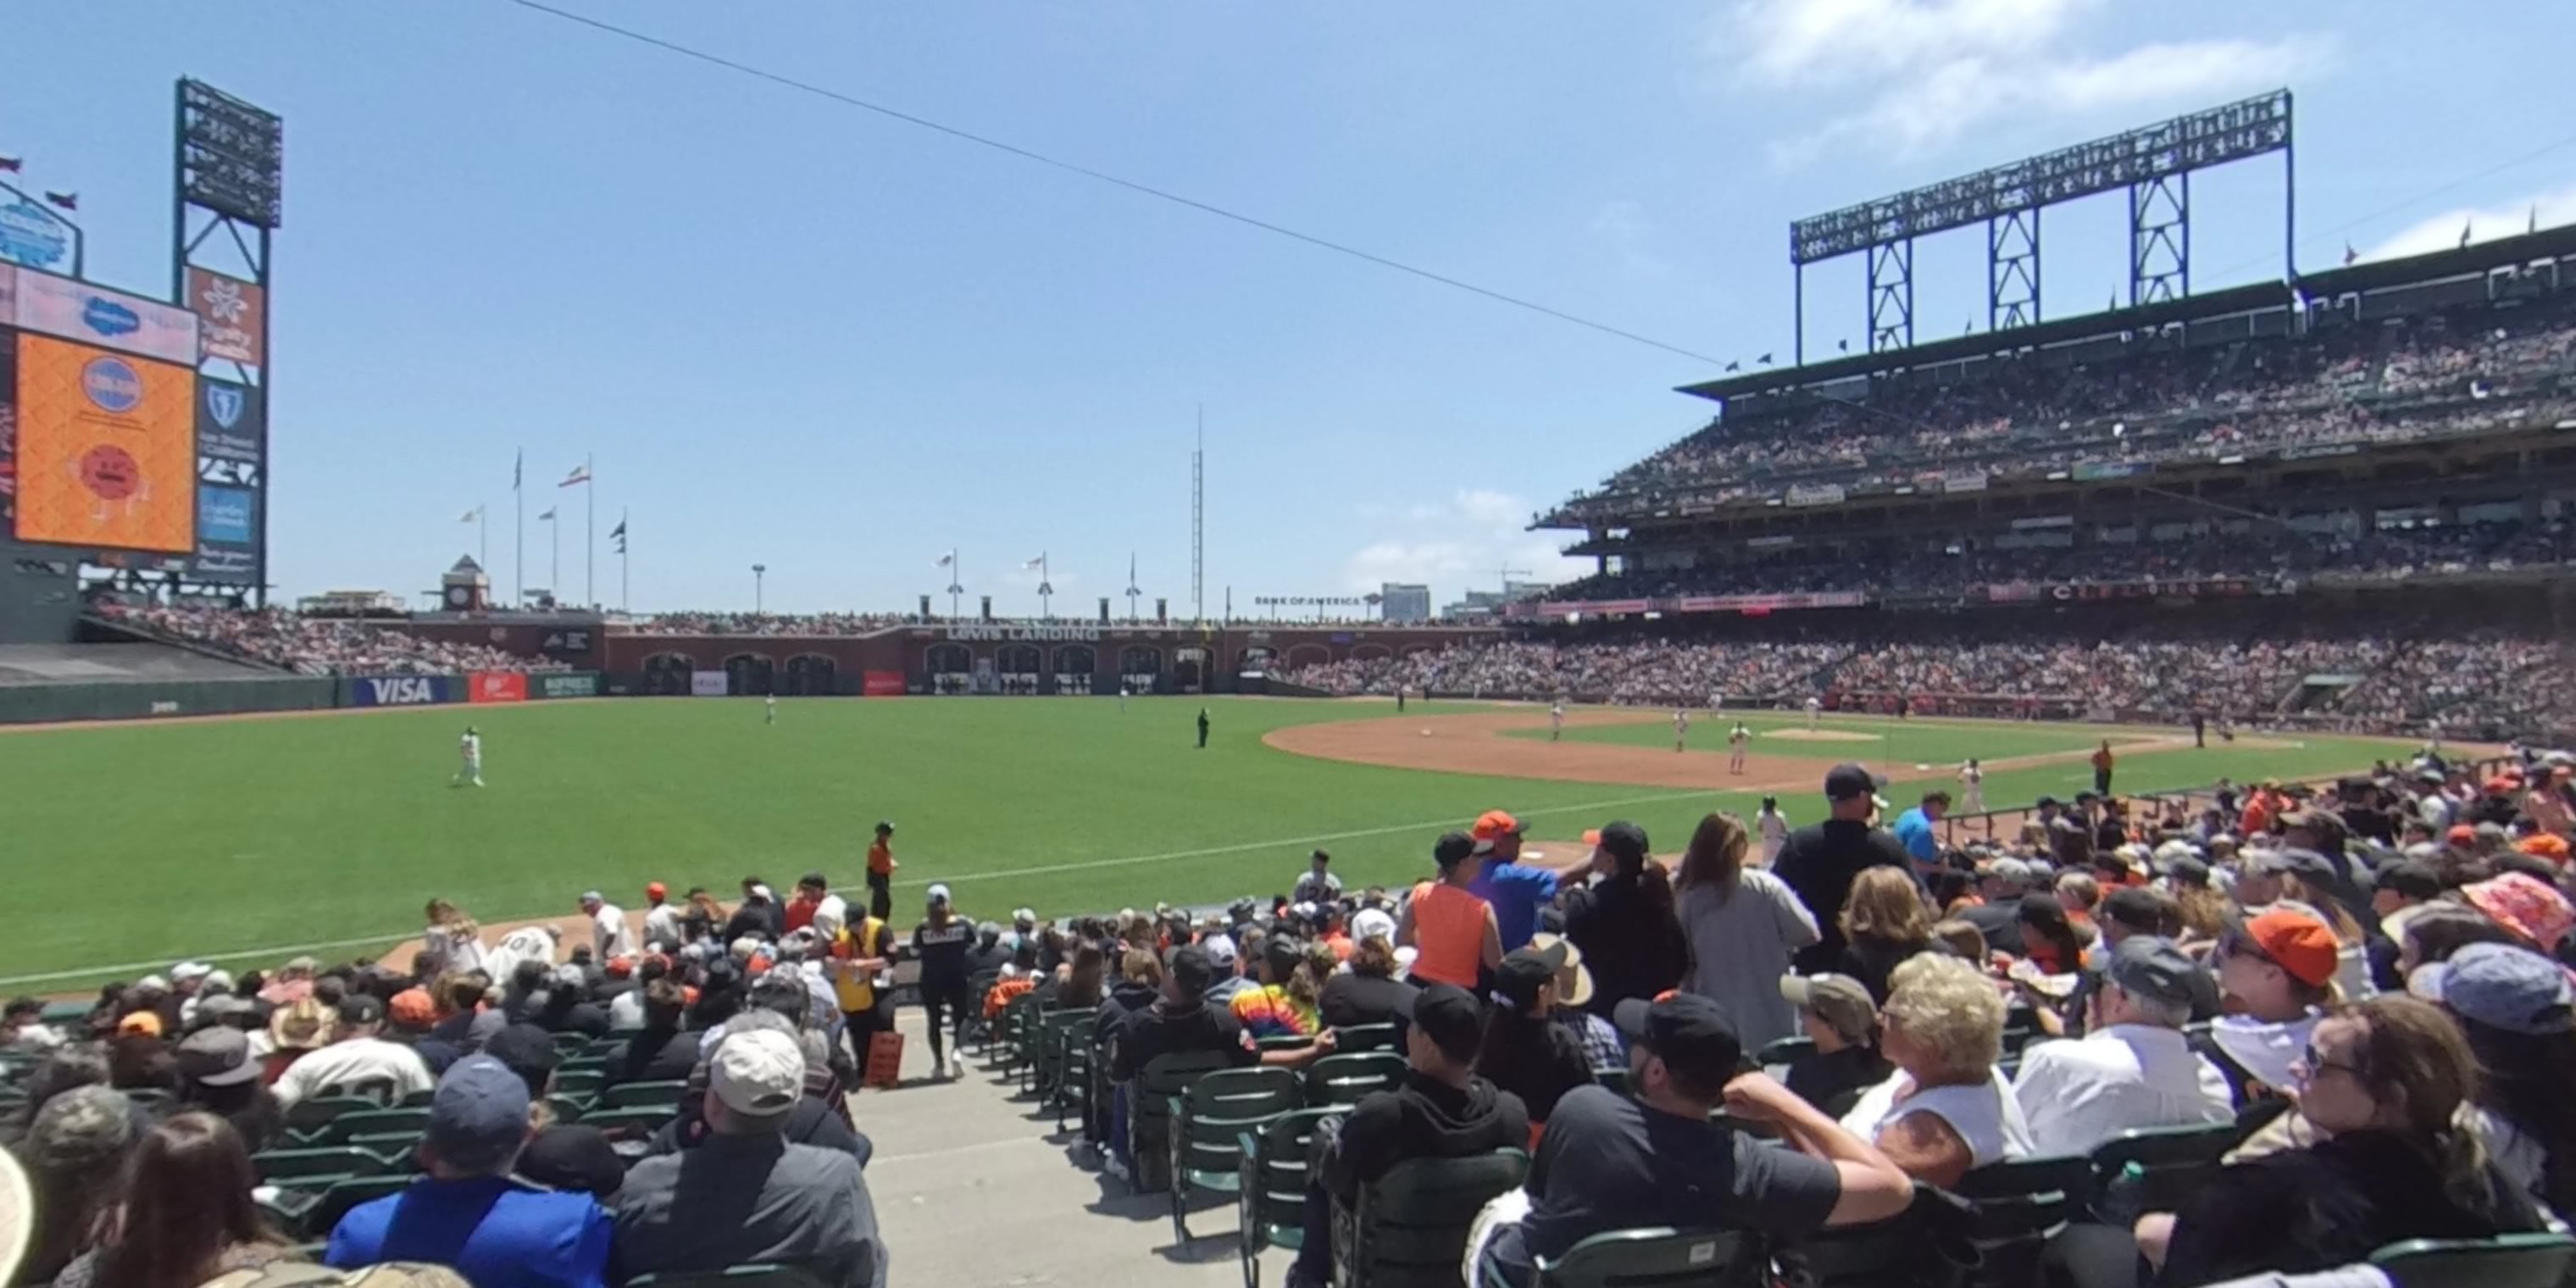 section 128 panoramic seat view  for baseball - oracle park